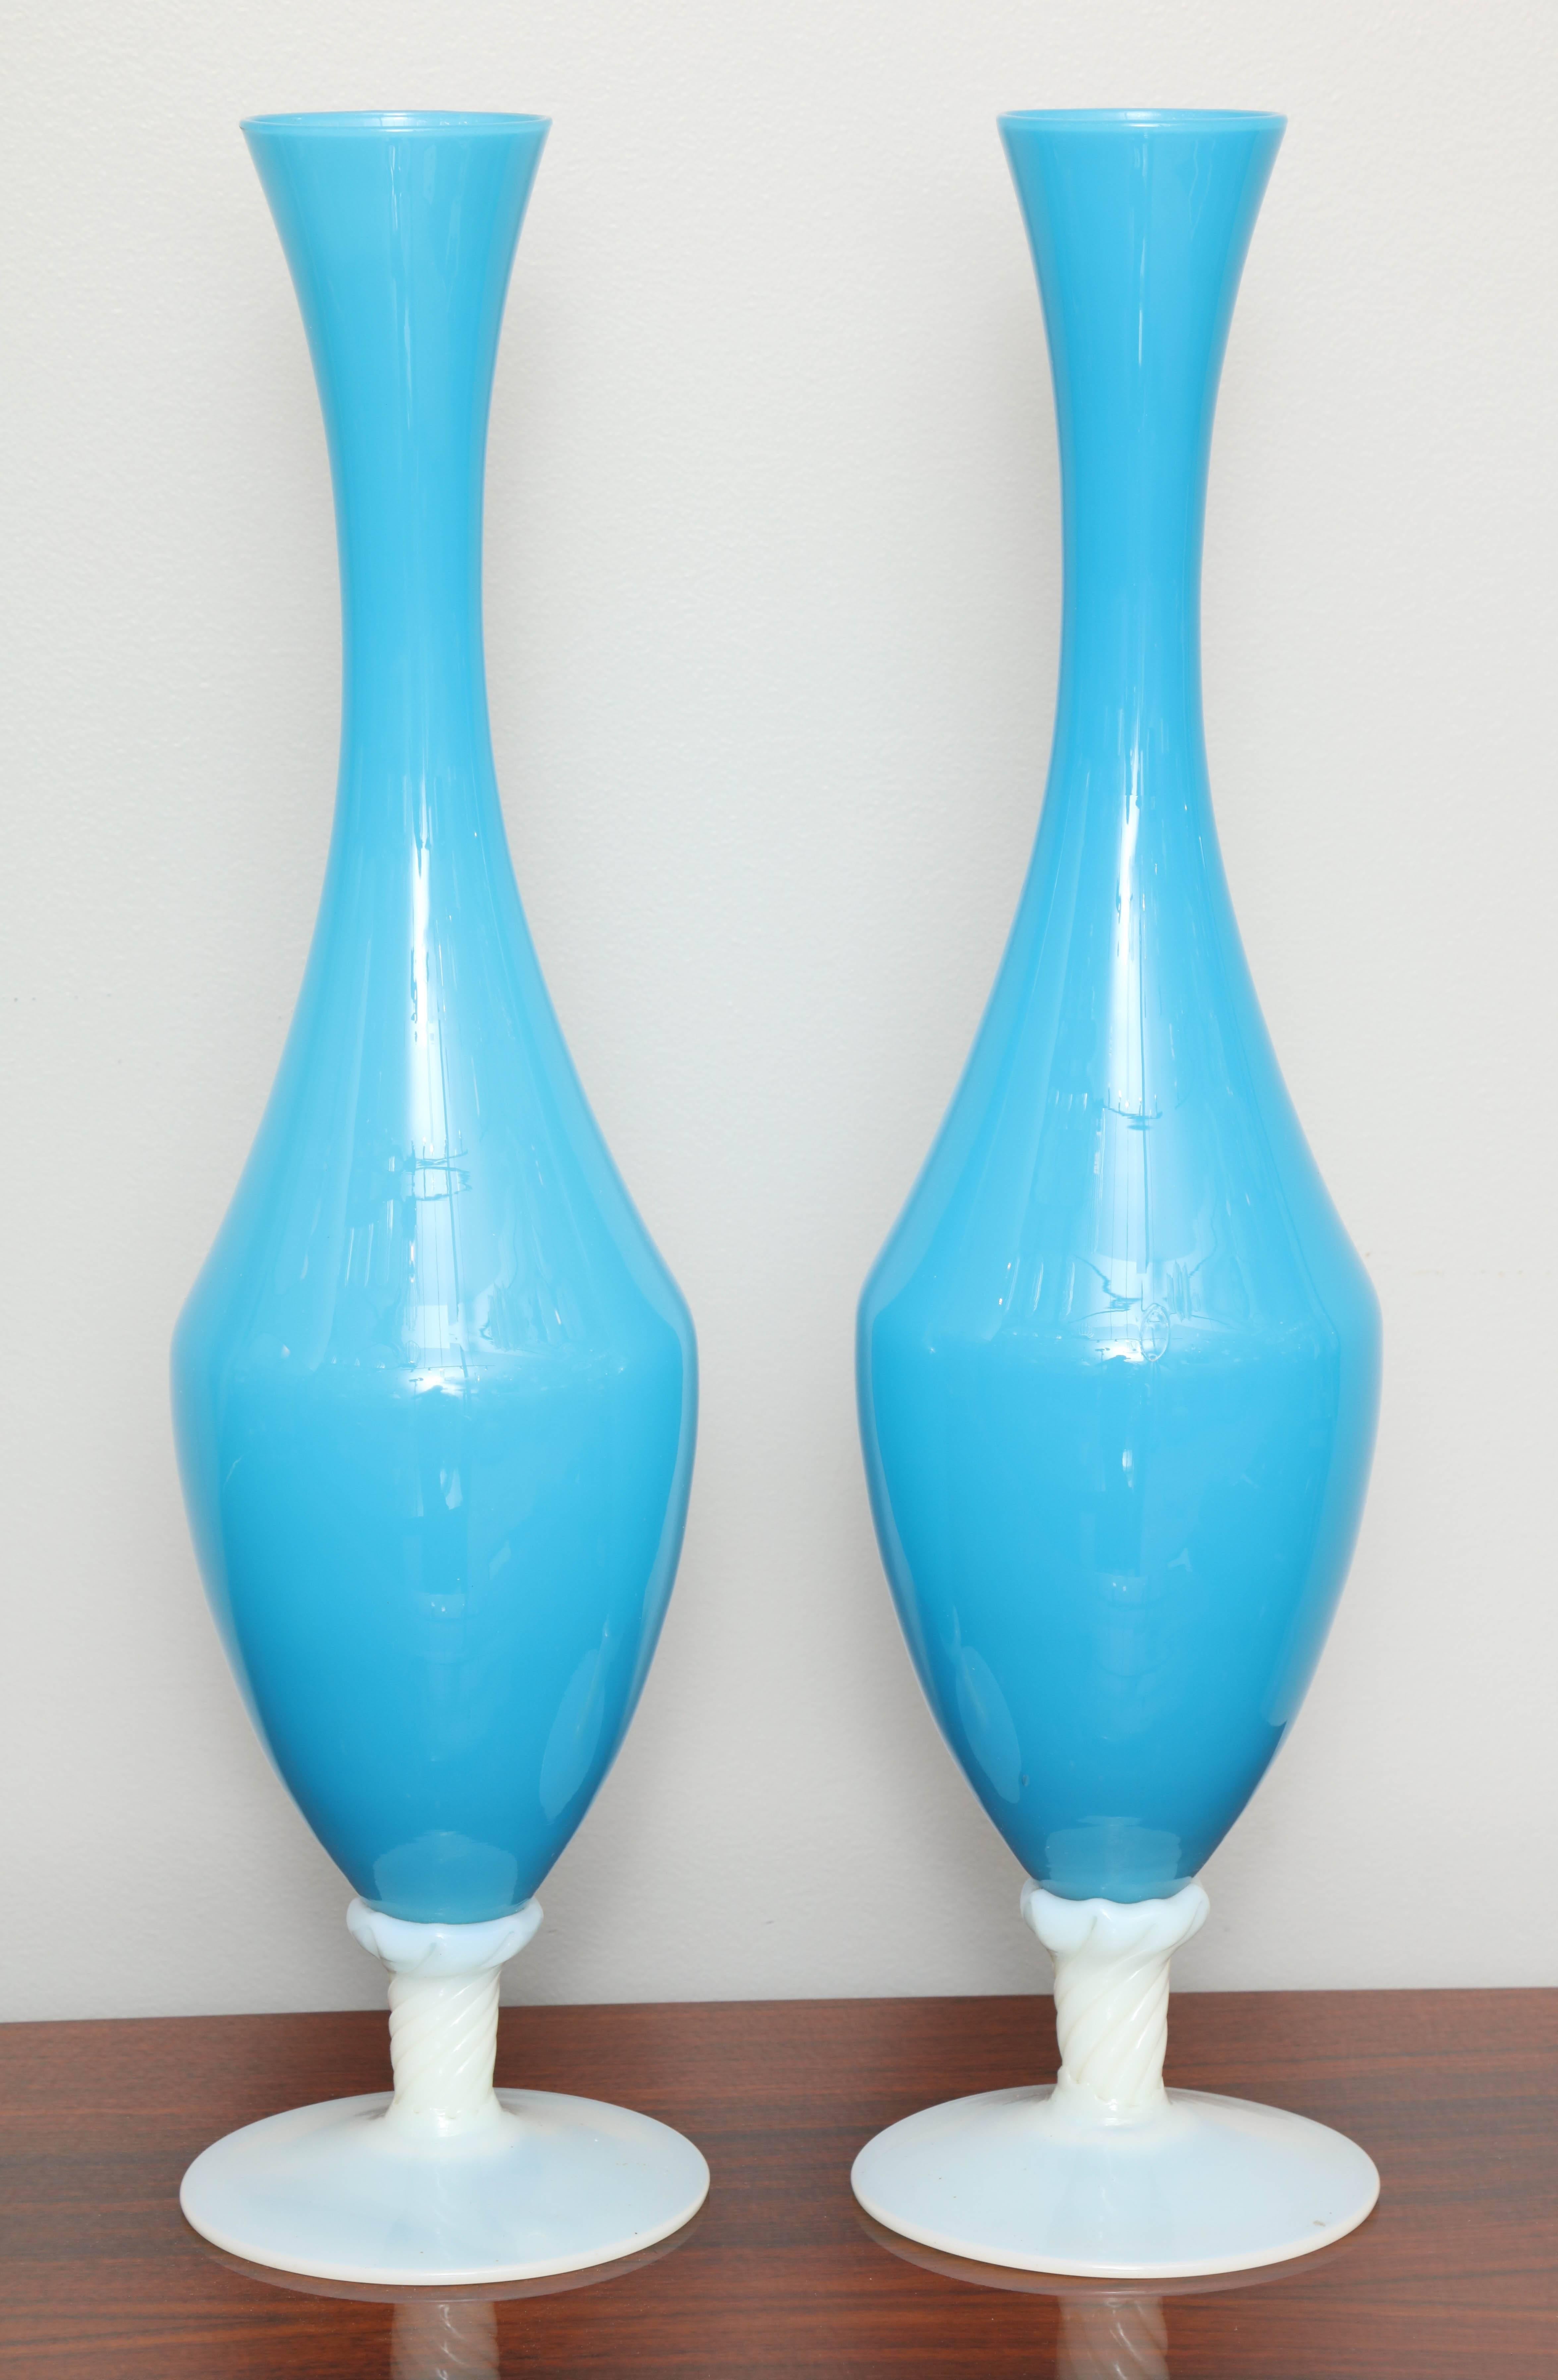 Matching blue and white opaline vases. Pair available; priced and sold individually.